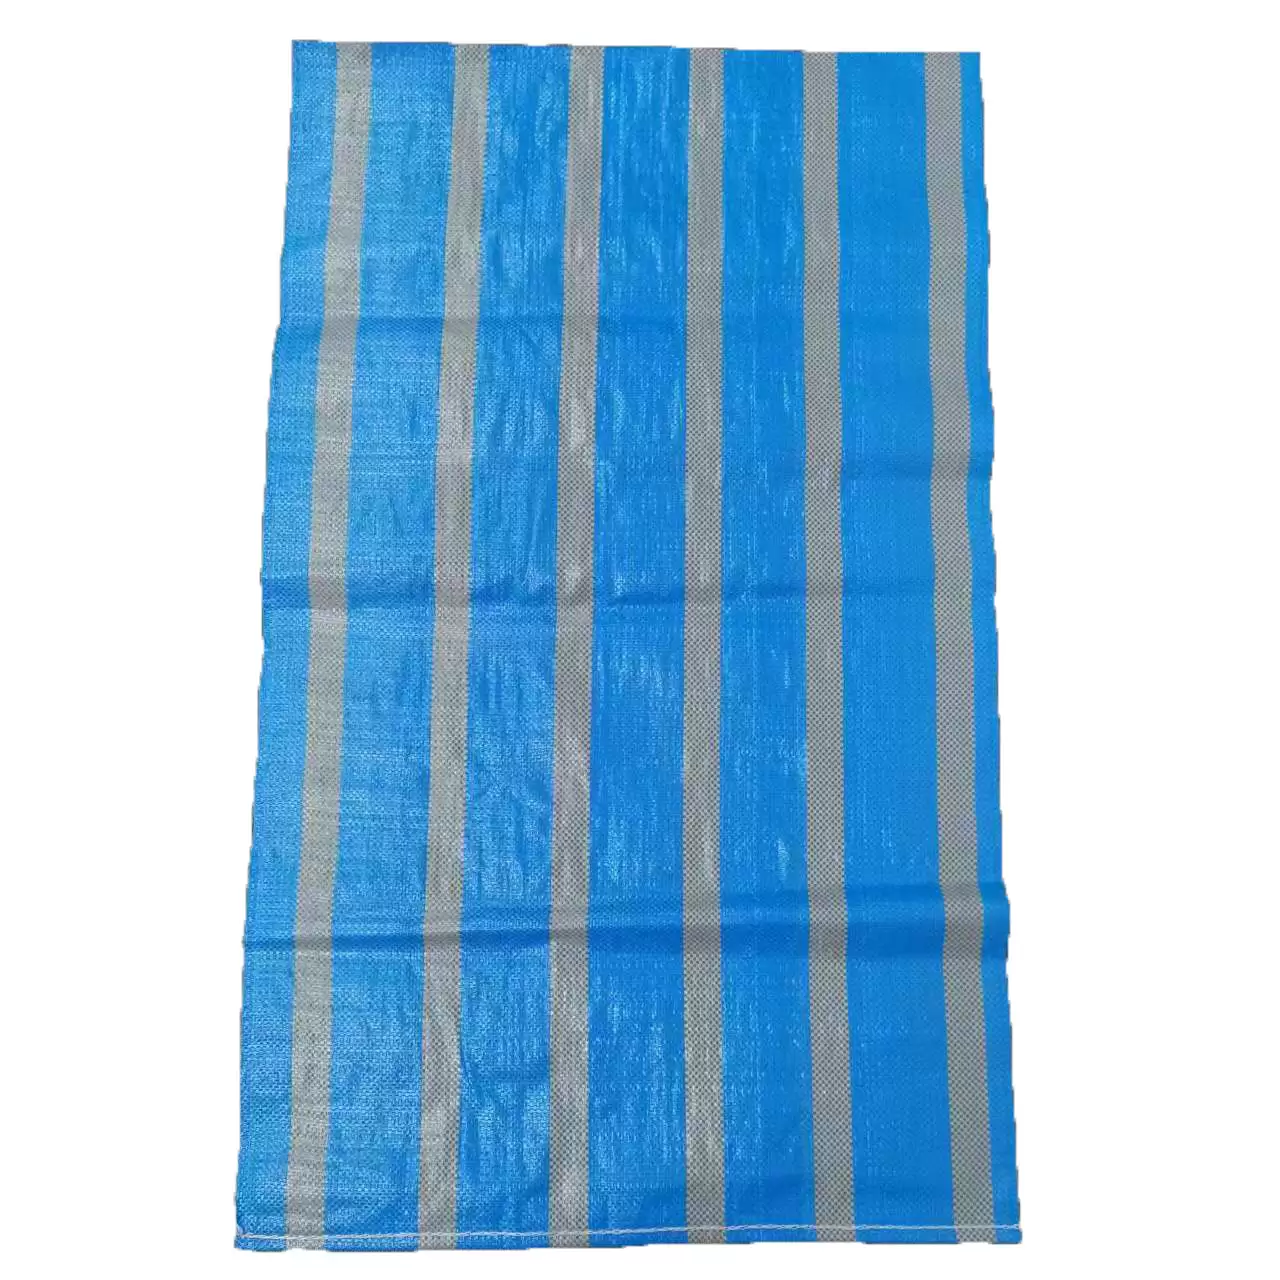 Supply 65*110 cm blue large woven polypropylene bags for bean products